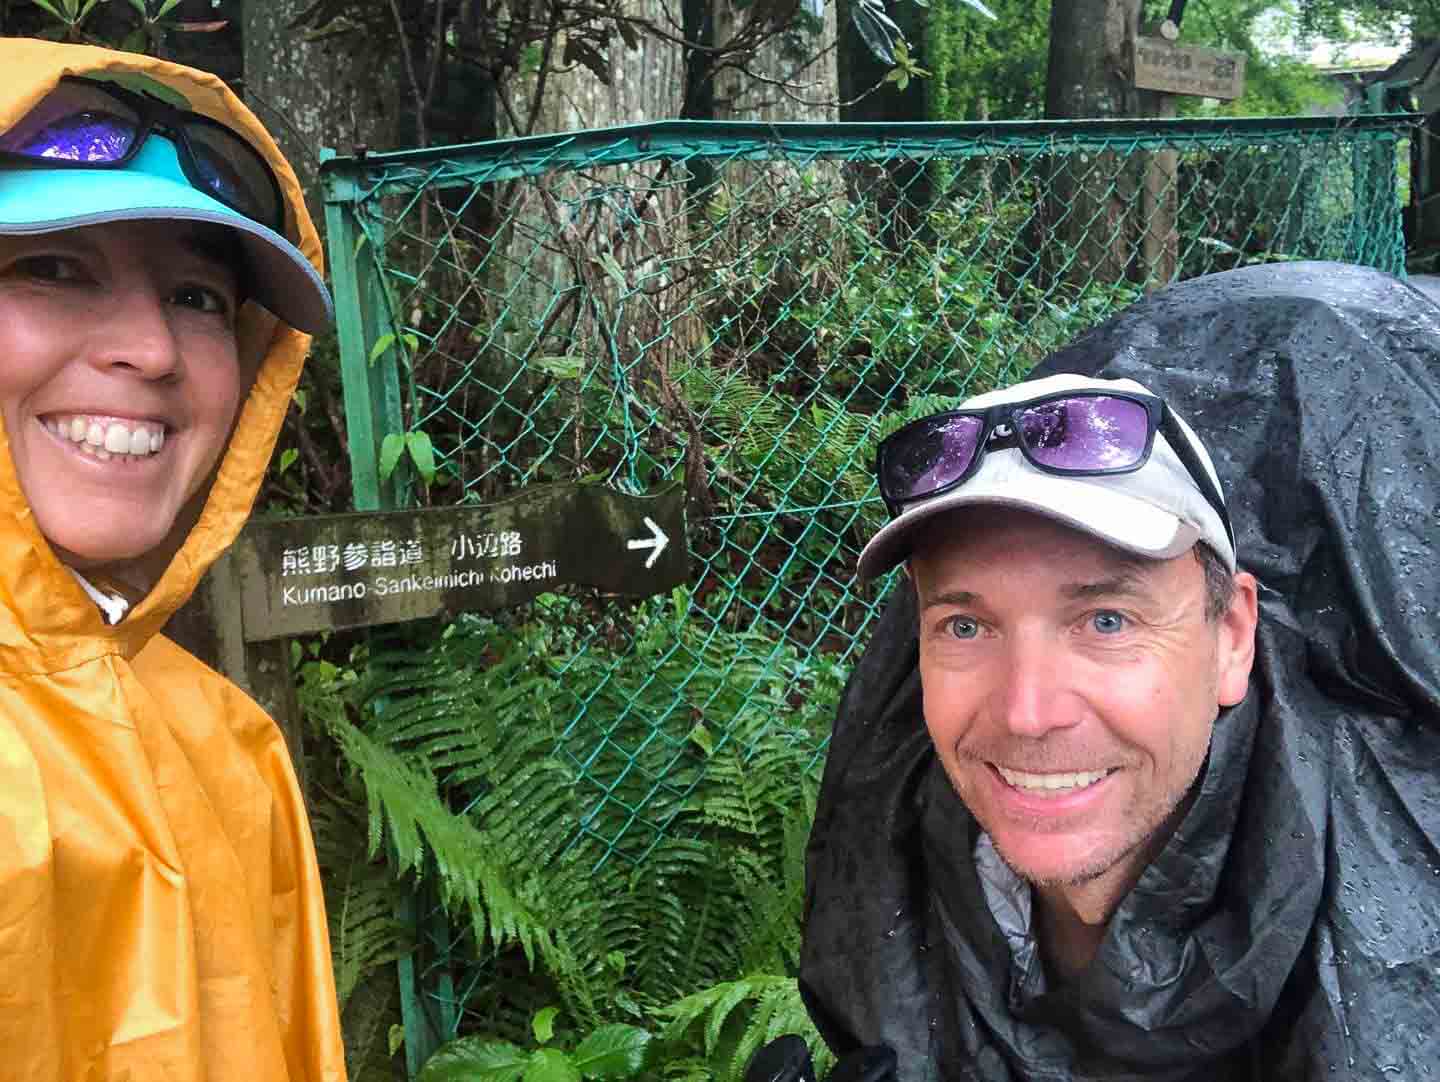 A woman in a yellow rain cover takes a selfie with a man wearing a black rain cover. They are both ginning at the camera at the start of the Kohechi Kumano Pilgrimage Route in Japan. They both have matching sunglasses resting on top of their caps and are about to set off for the trek.